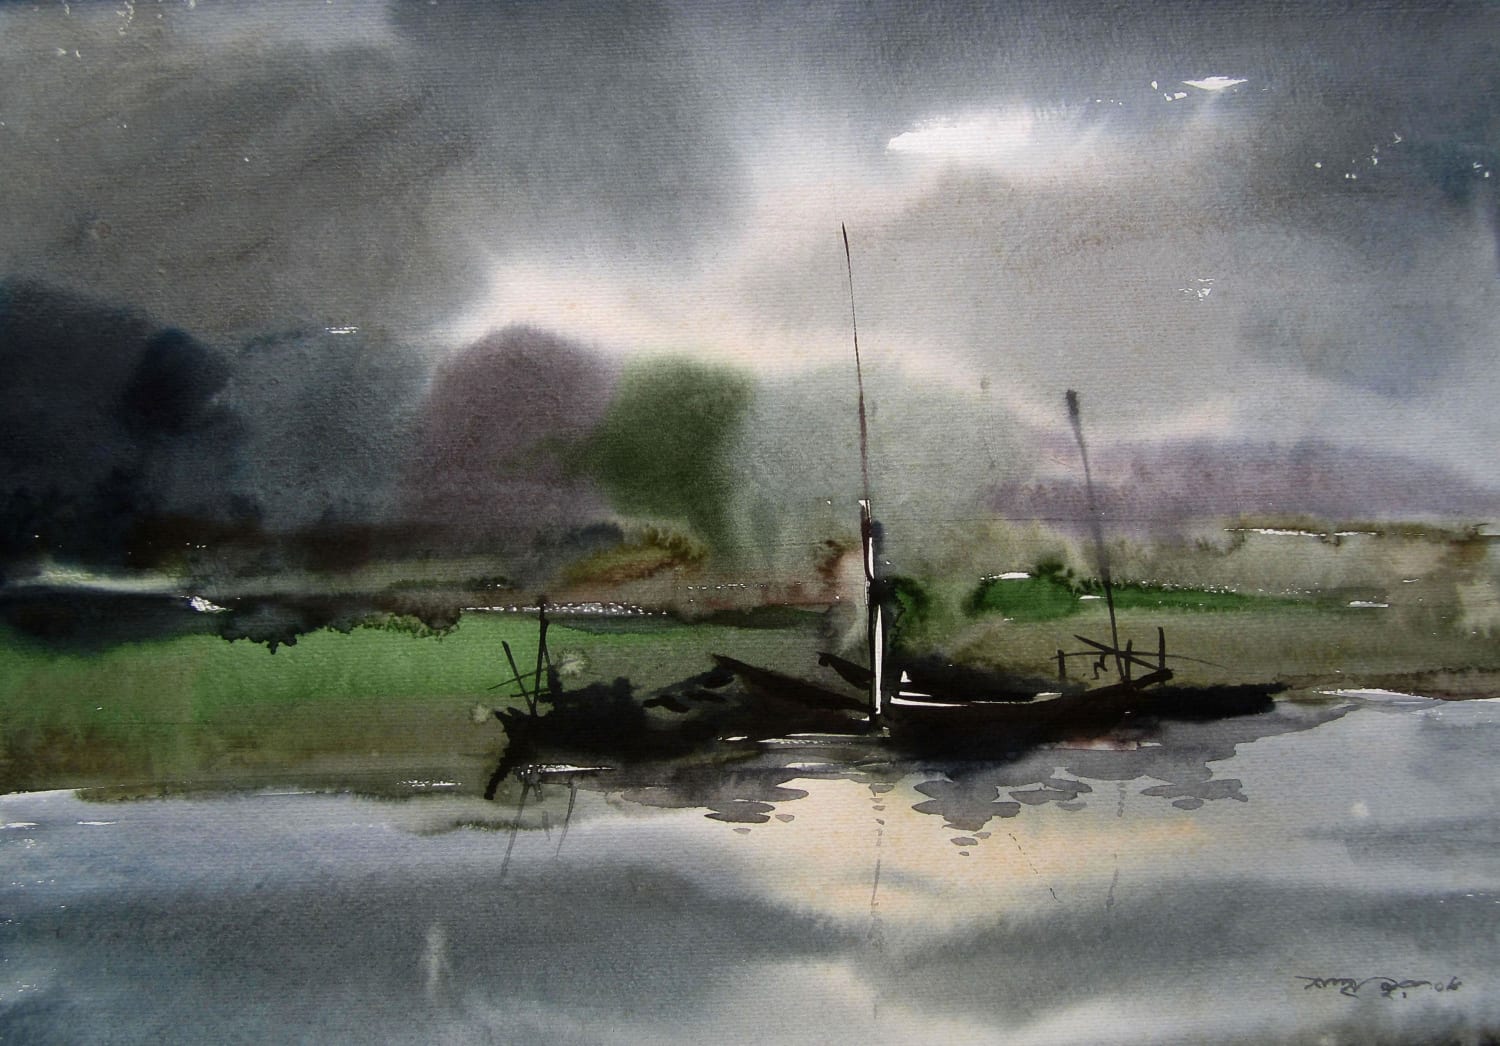 Monsoon,, Me, Watercolor on paper, 2008